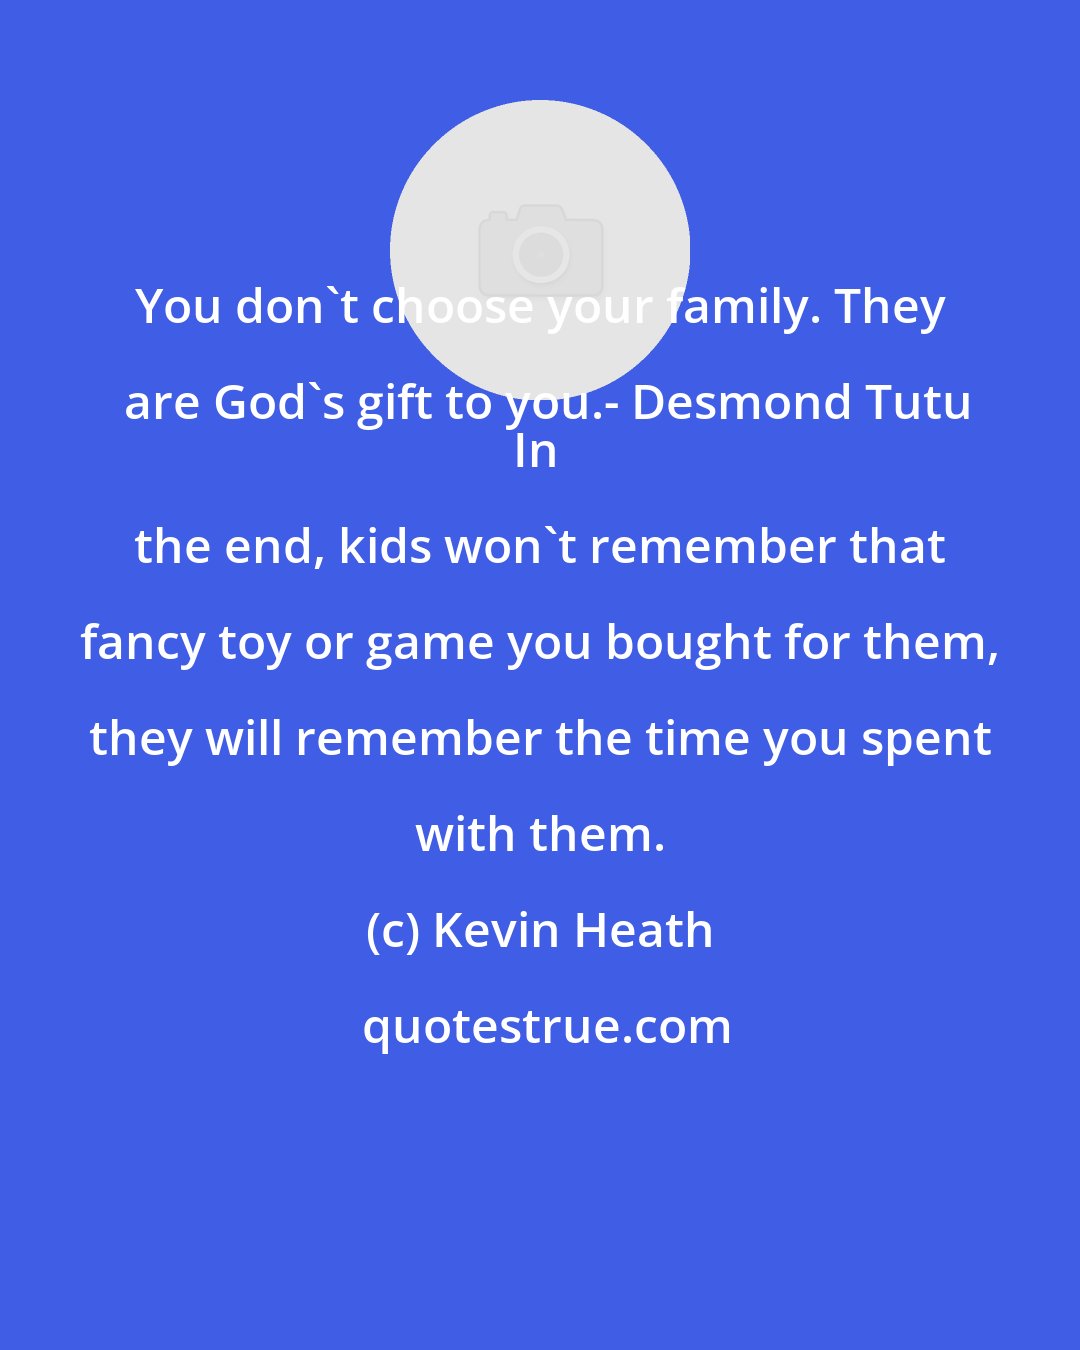 Kevin Heath: You don't choose your family. They are God's gift to you.- Desmond Tutu
In the end, kids won't remember that fancy toy or game you bought for them, they will remember the time you spent with them.